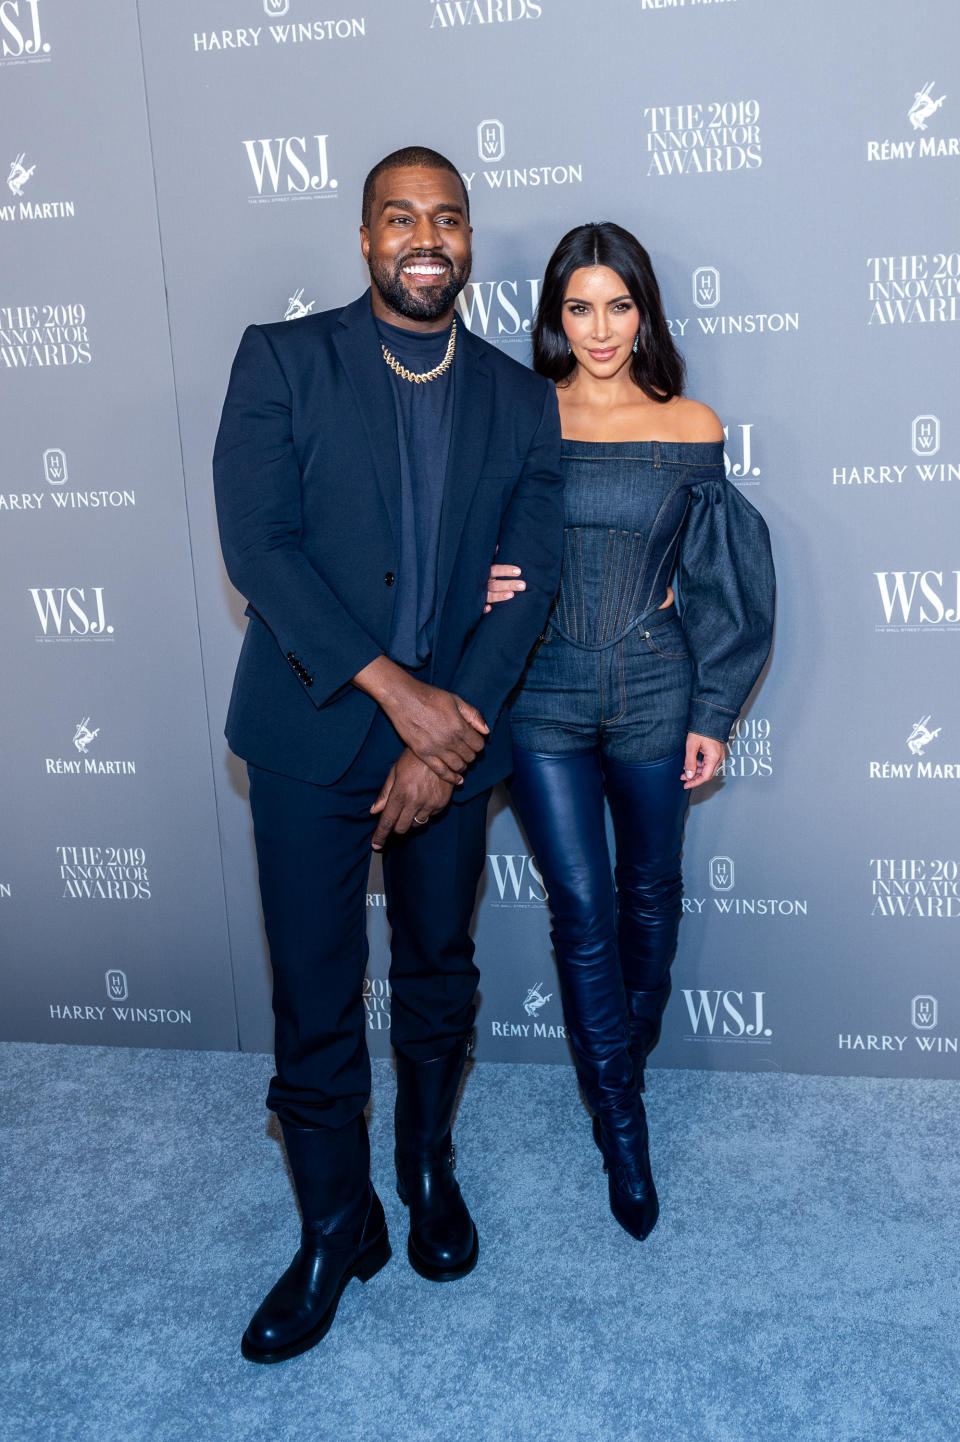 Kimye first met in 2003 on the set of a music video, but it wasn't until after her 72 day marriage to Kris Humphries that the pair started dating. In December 2012, Kanye revealed that Kim was pregnant with their first child. The couple were married in 2014, and now share four children together. Photo: Getty Images